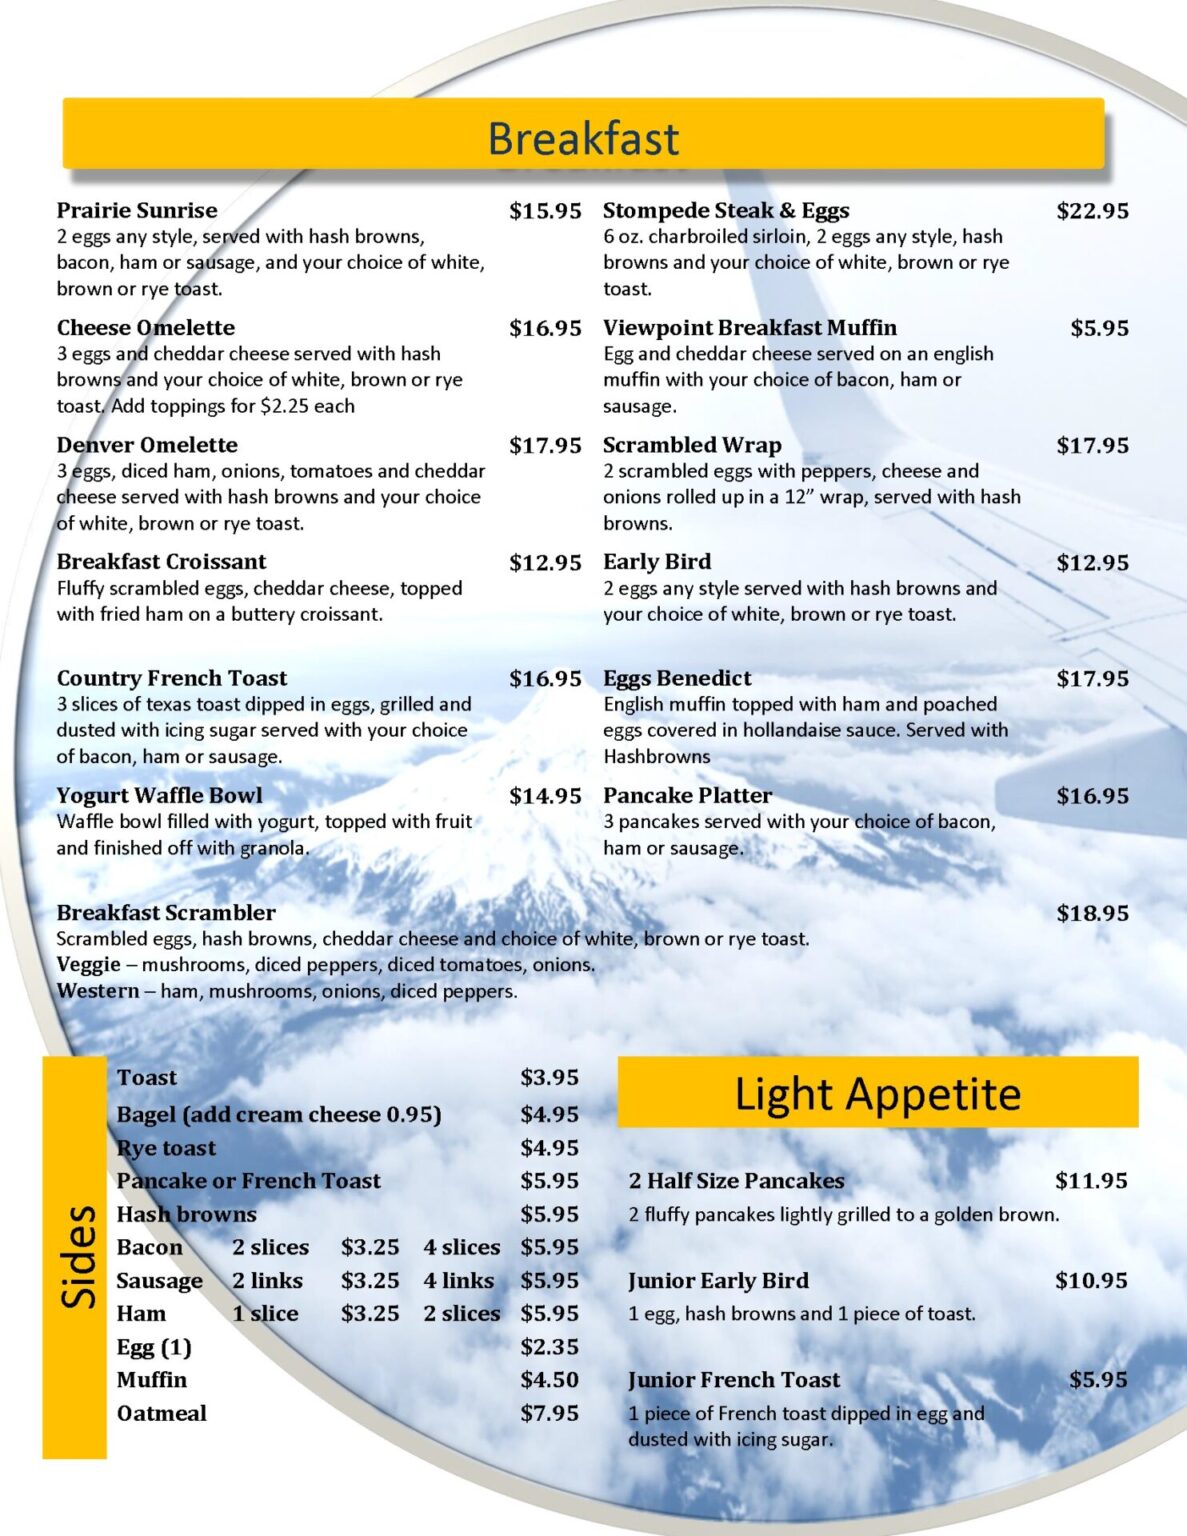 Viewpoint Restaurant & Lounge - Menu Page 2